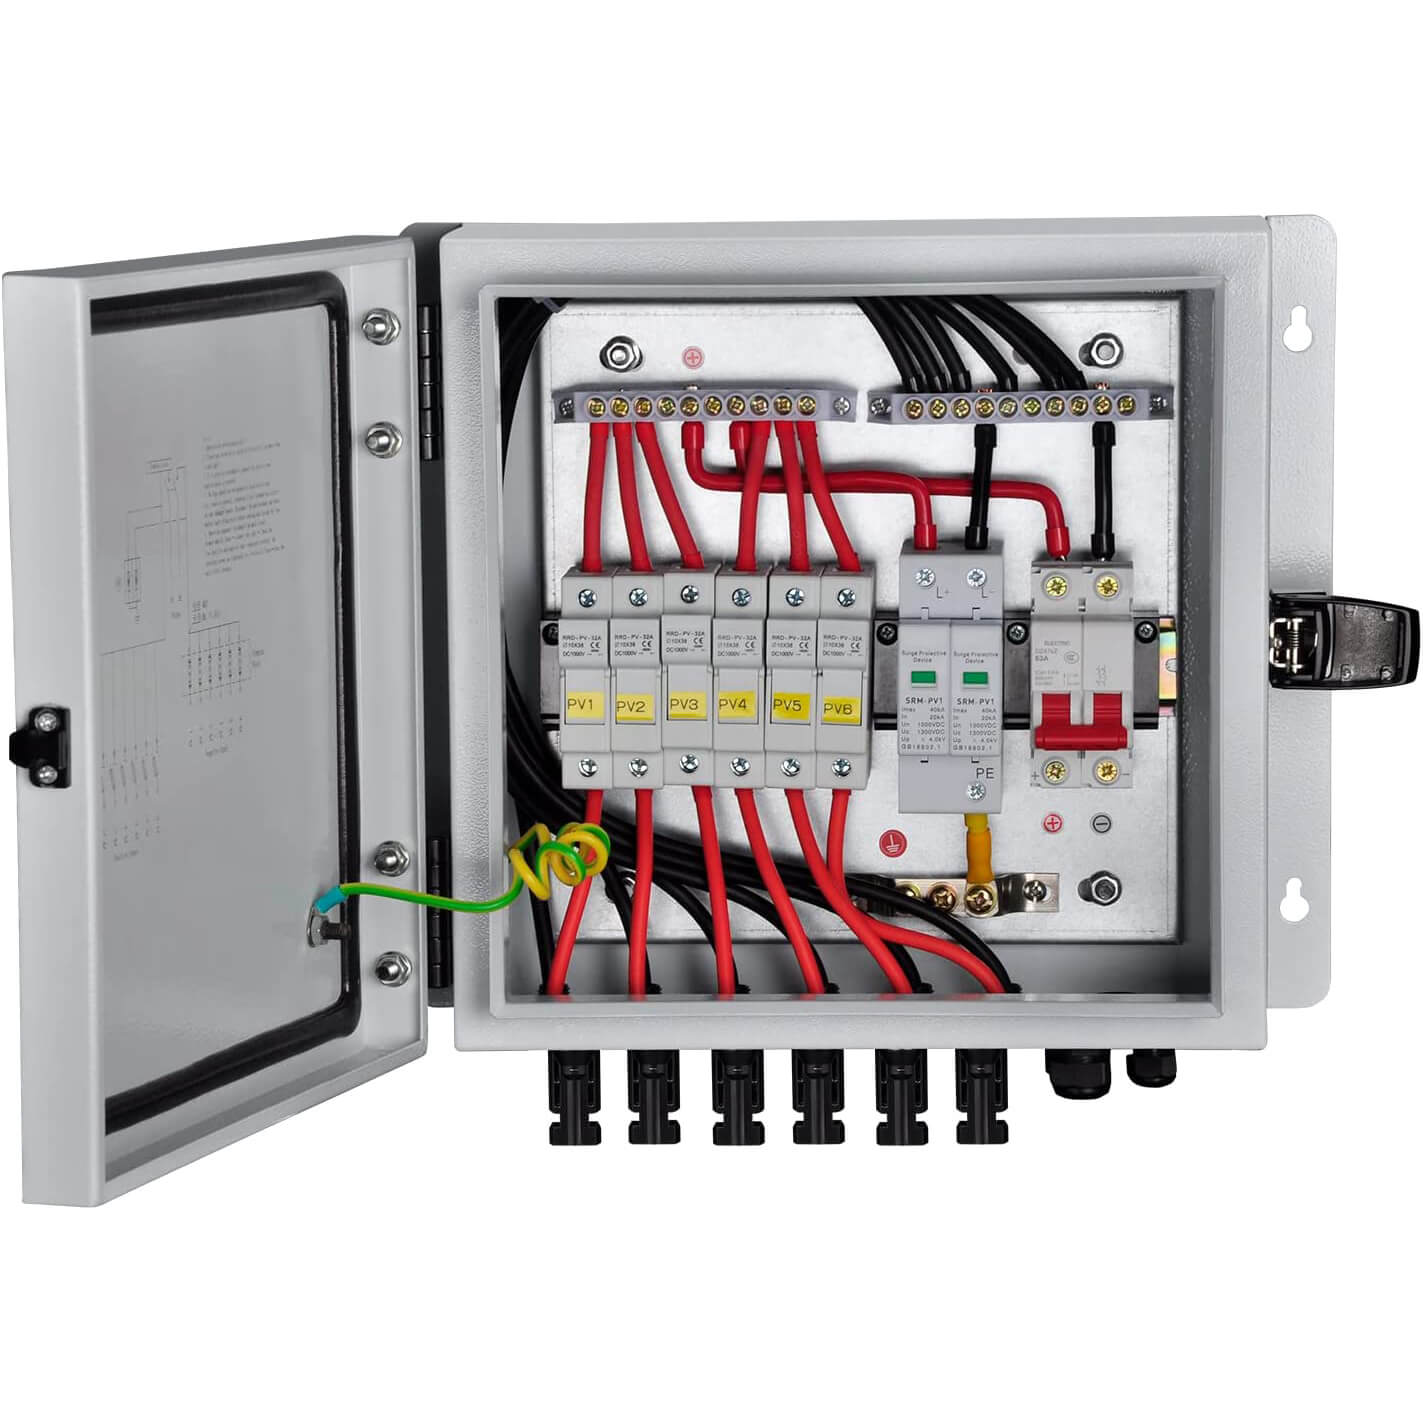 PowGrow PV combiner box With 15A Rated Current Fuse, Surge Protective Device, and 63A Air Circuit Breaker